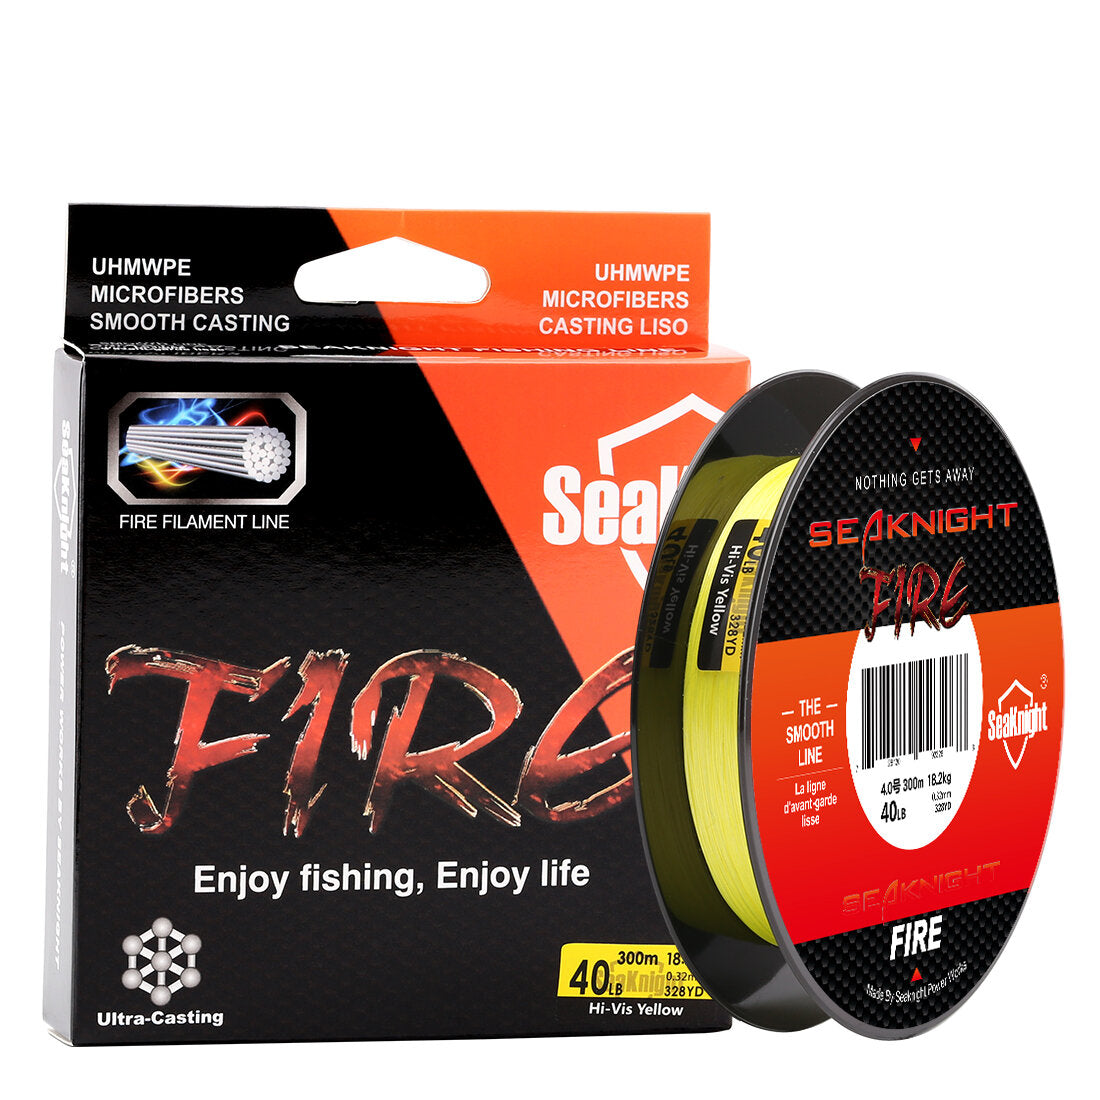 FIRE Fishing Line 300M Fire Filament Line Smooth Super PE Fire Fishing Line Floating Line